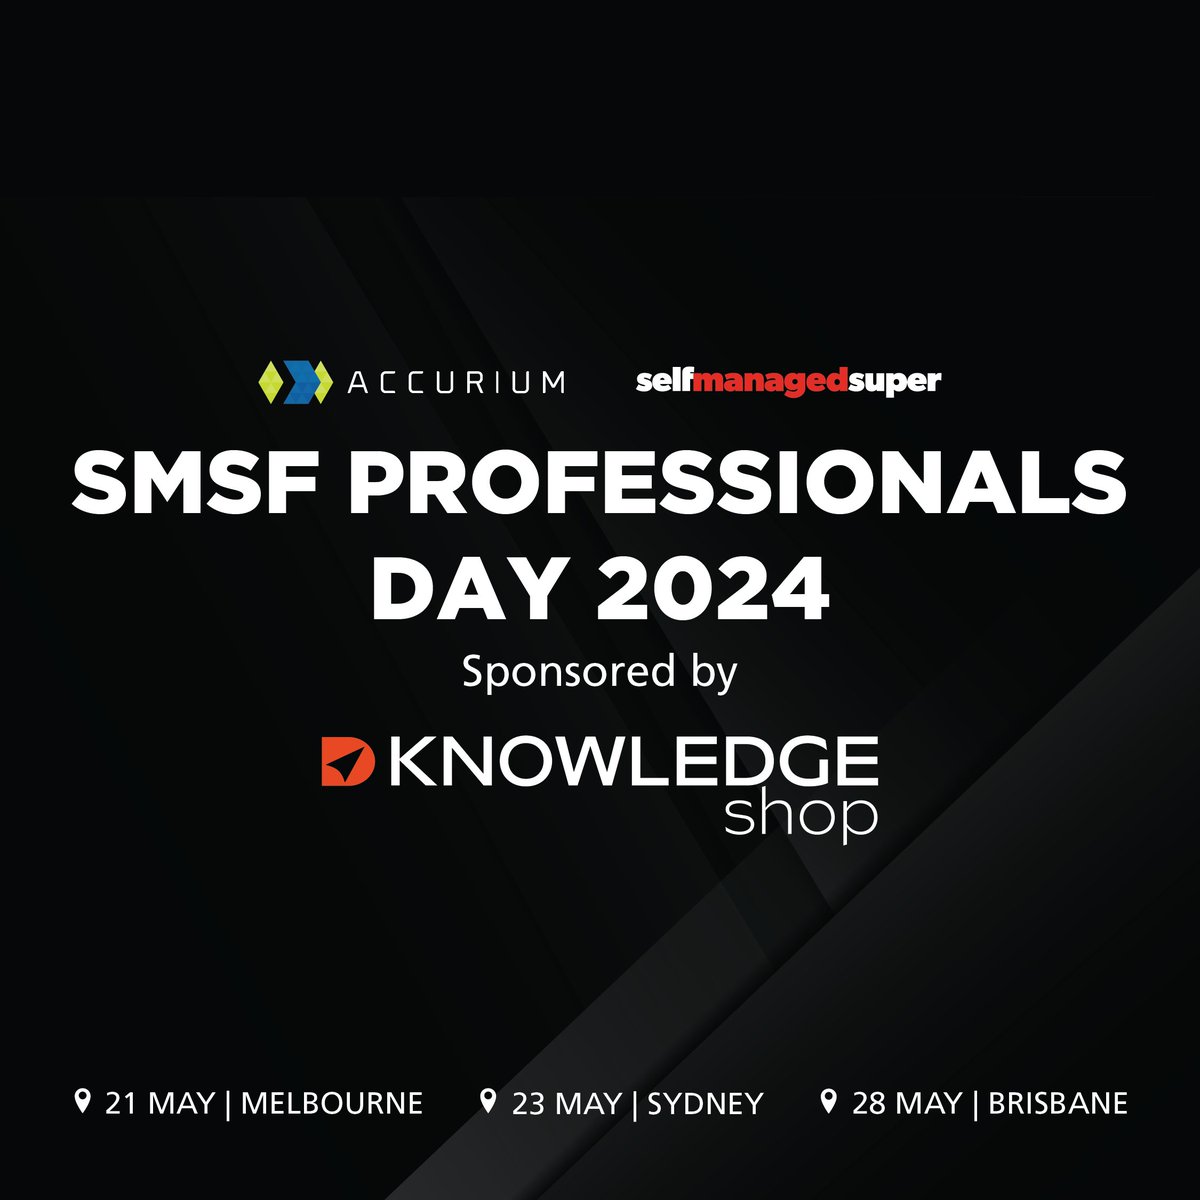 We are delighted to welcome @knowledgeshopAU as a proud sponsor of #SMSFPD. 🎉  

@knowledgeshopAU is dedicated to simplifying and streamlining the lives of professional accountants and advisers, making their working lives more efficient and effective. Don't miss the chance to